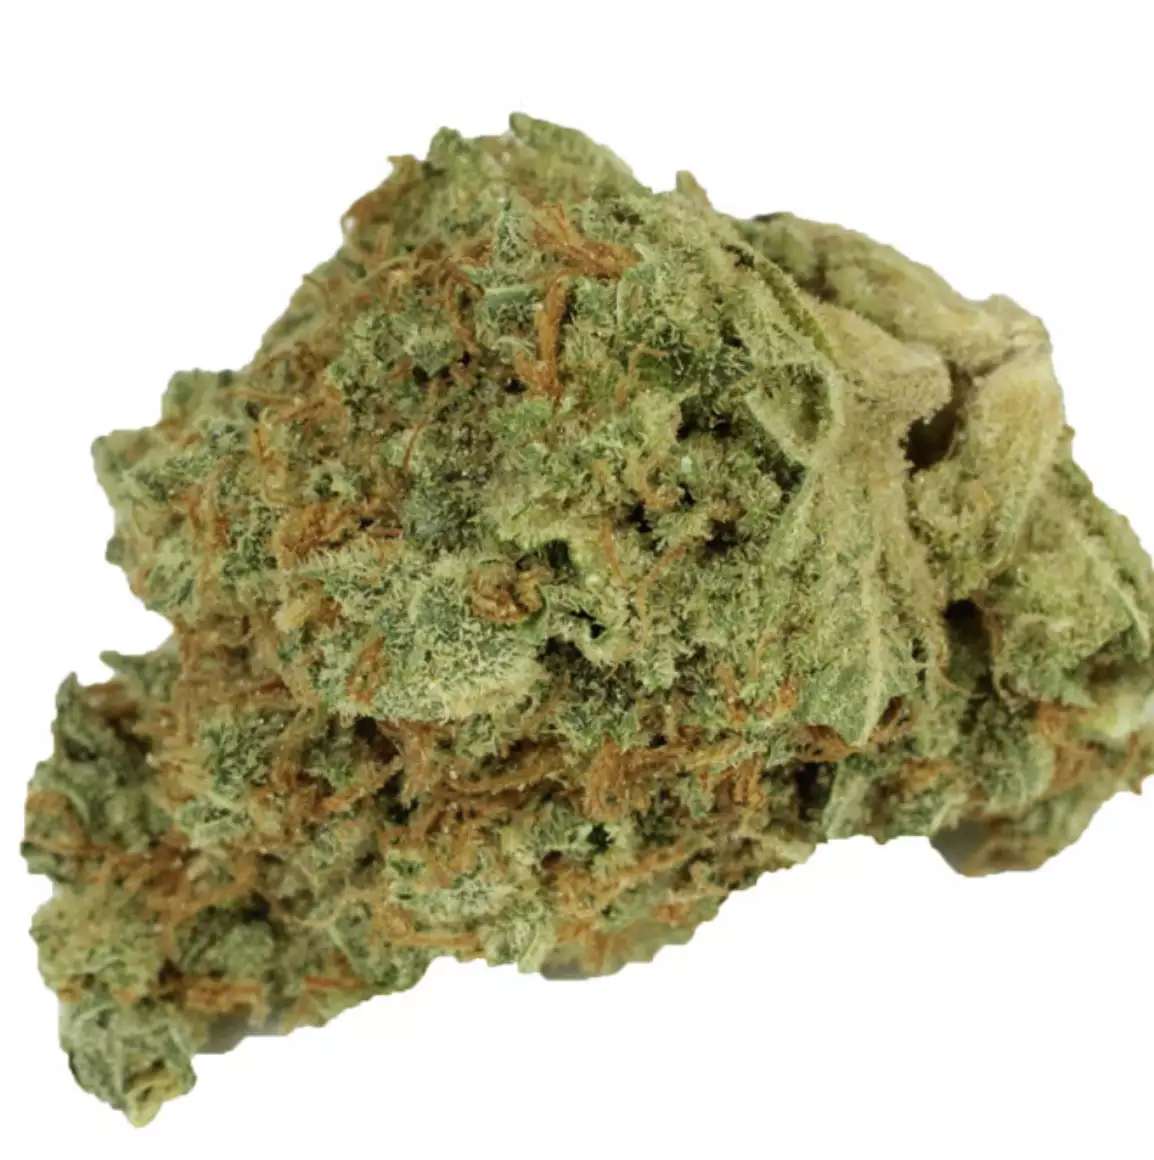 Bruce Banner Strain will provide a relaxing body high accompanied with useful pain killing effects for users. Its used to treat anxiety and stress levels